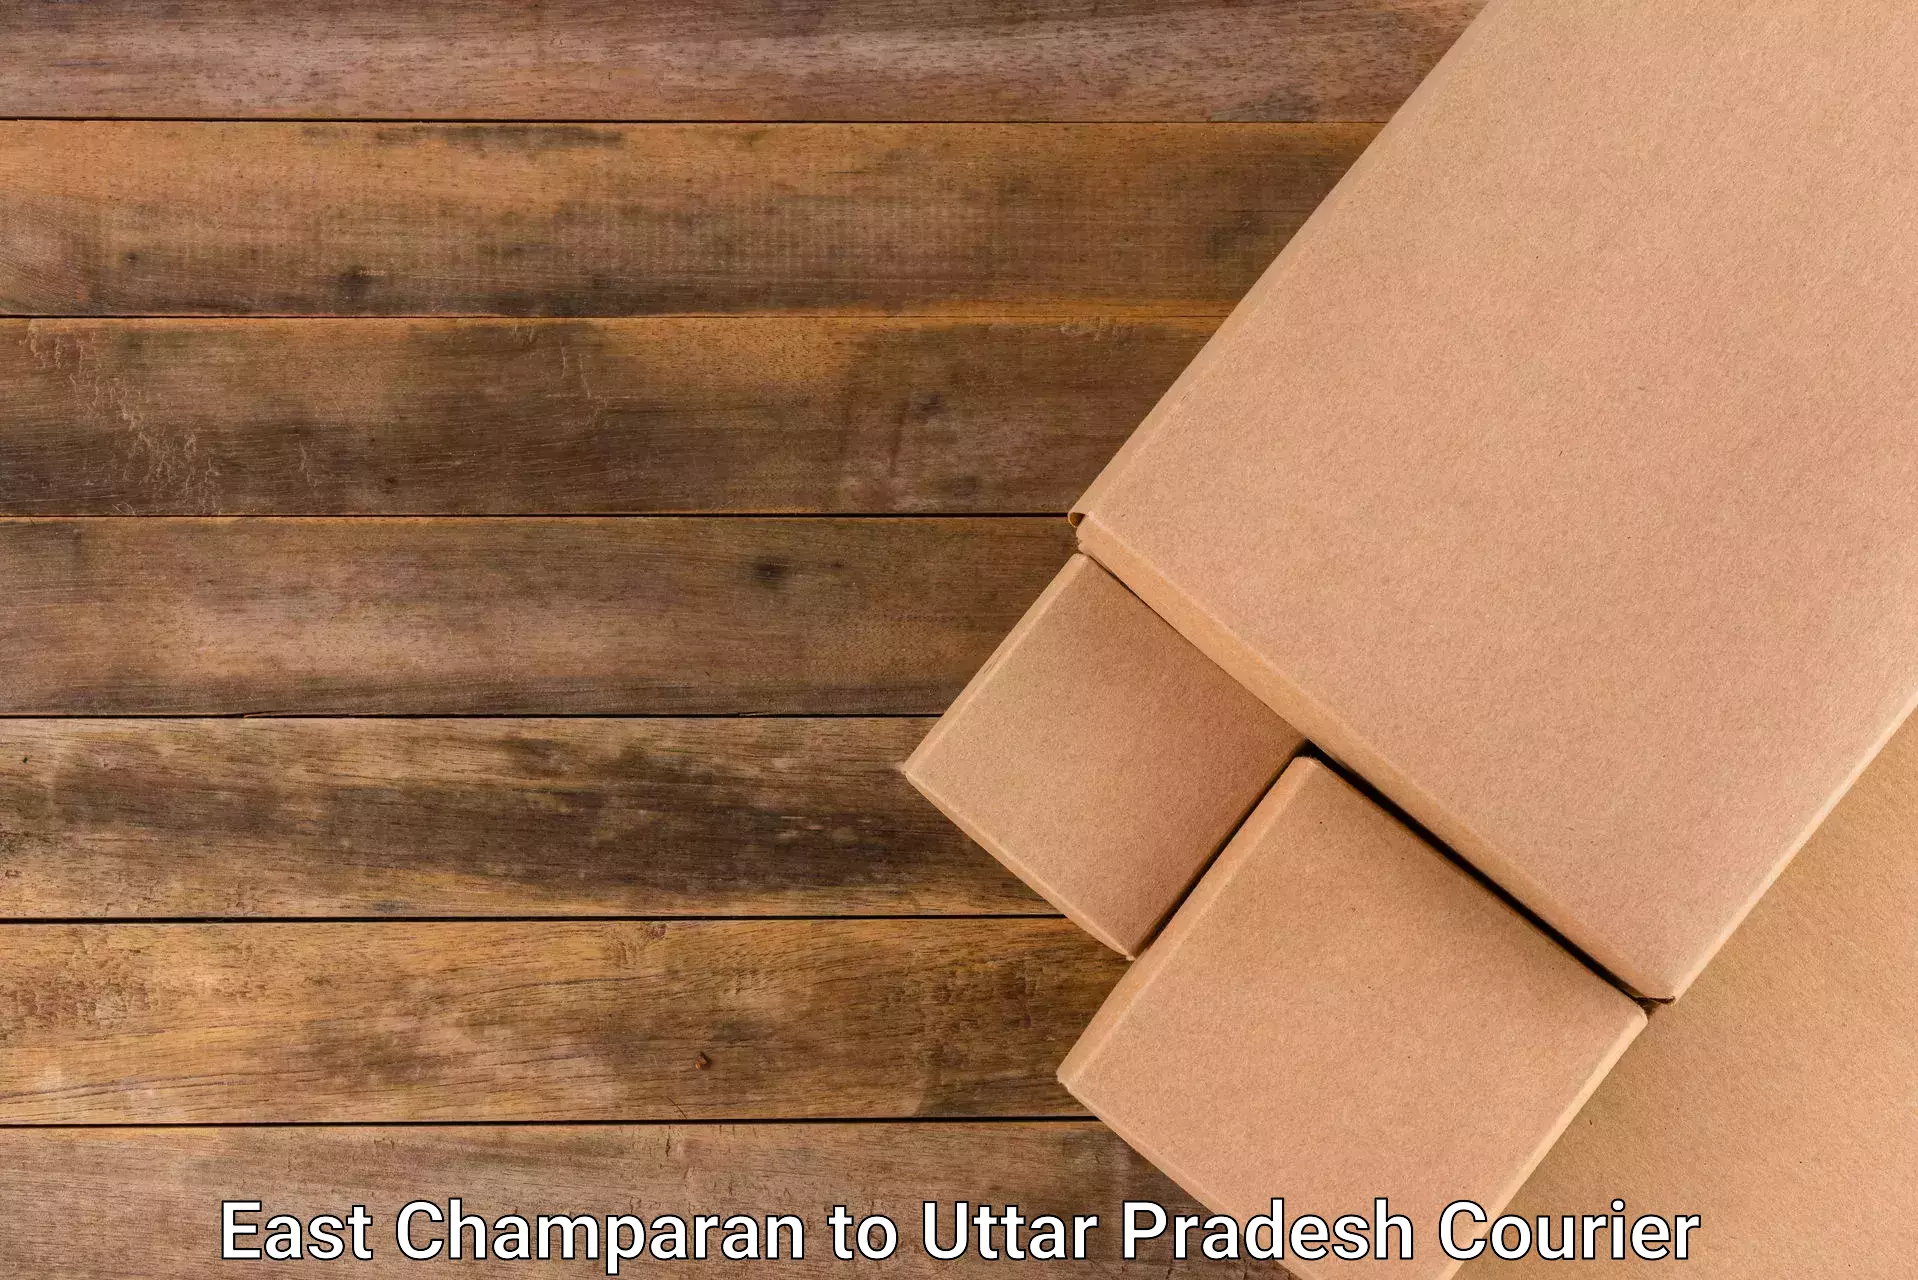 Urban courier service East Champaran to Babatpur